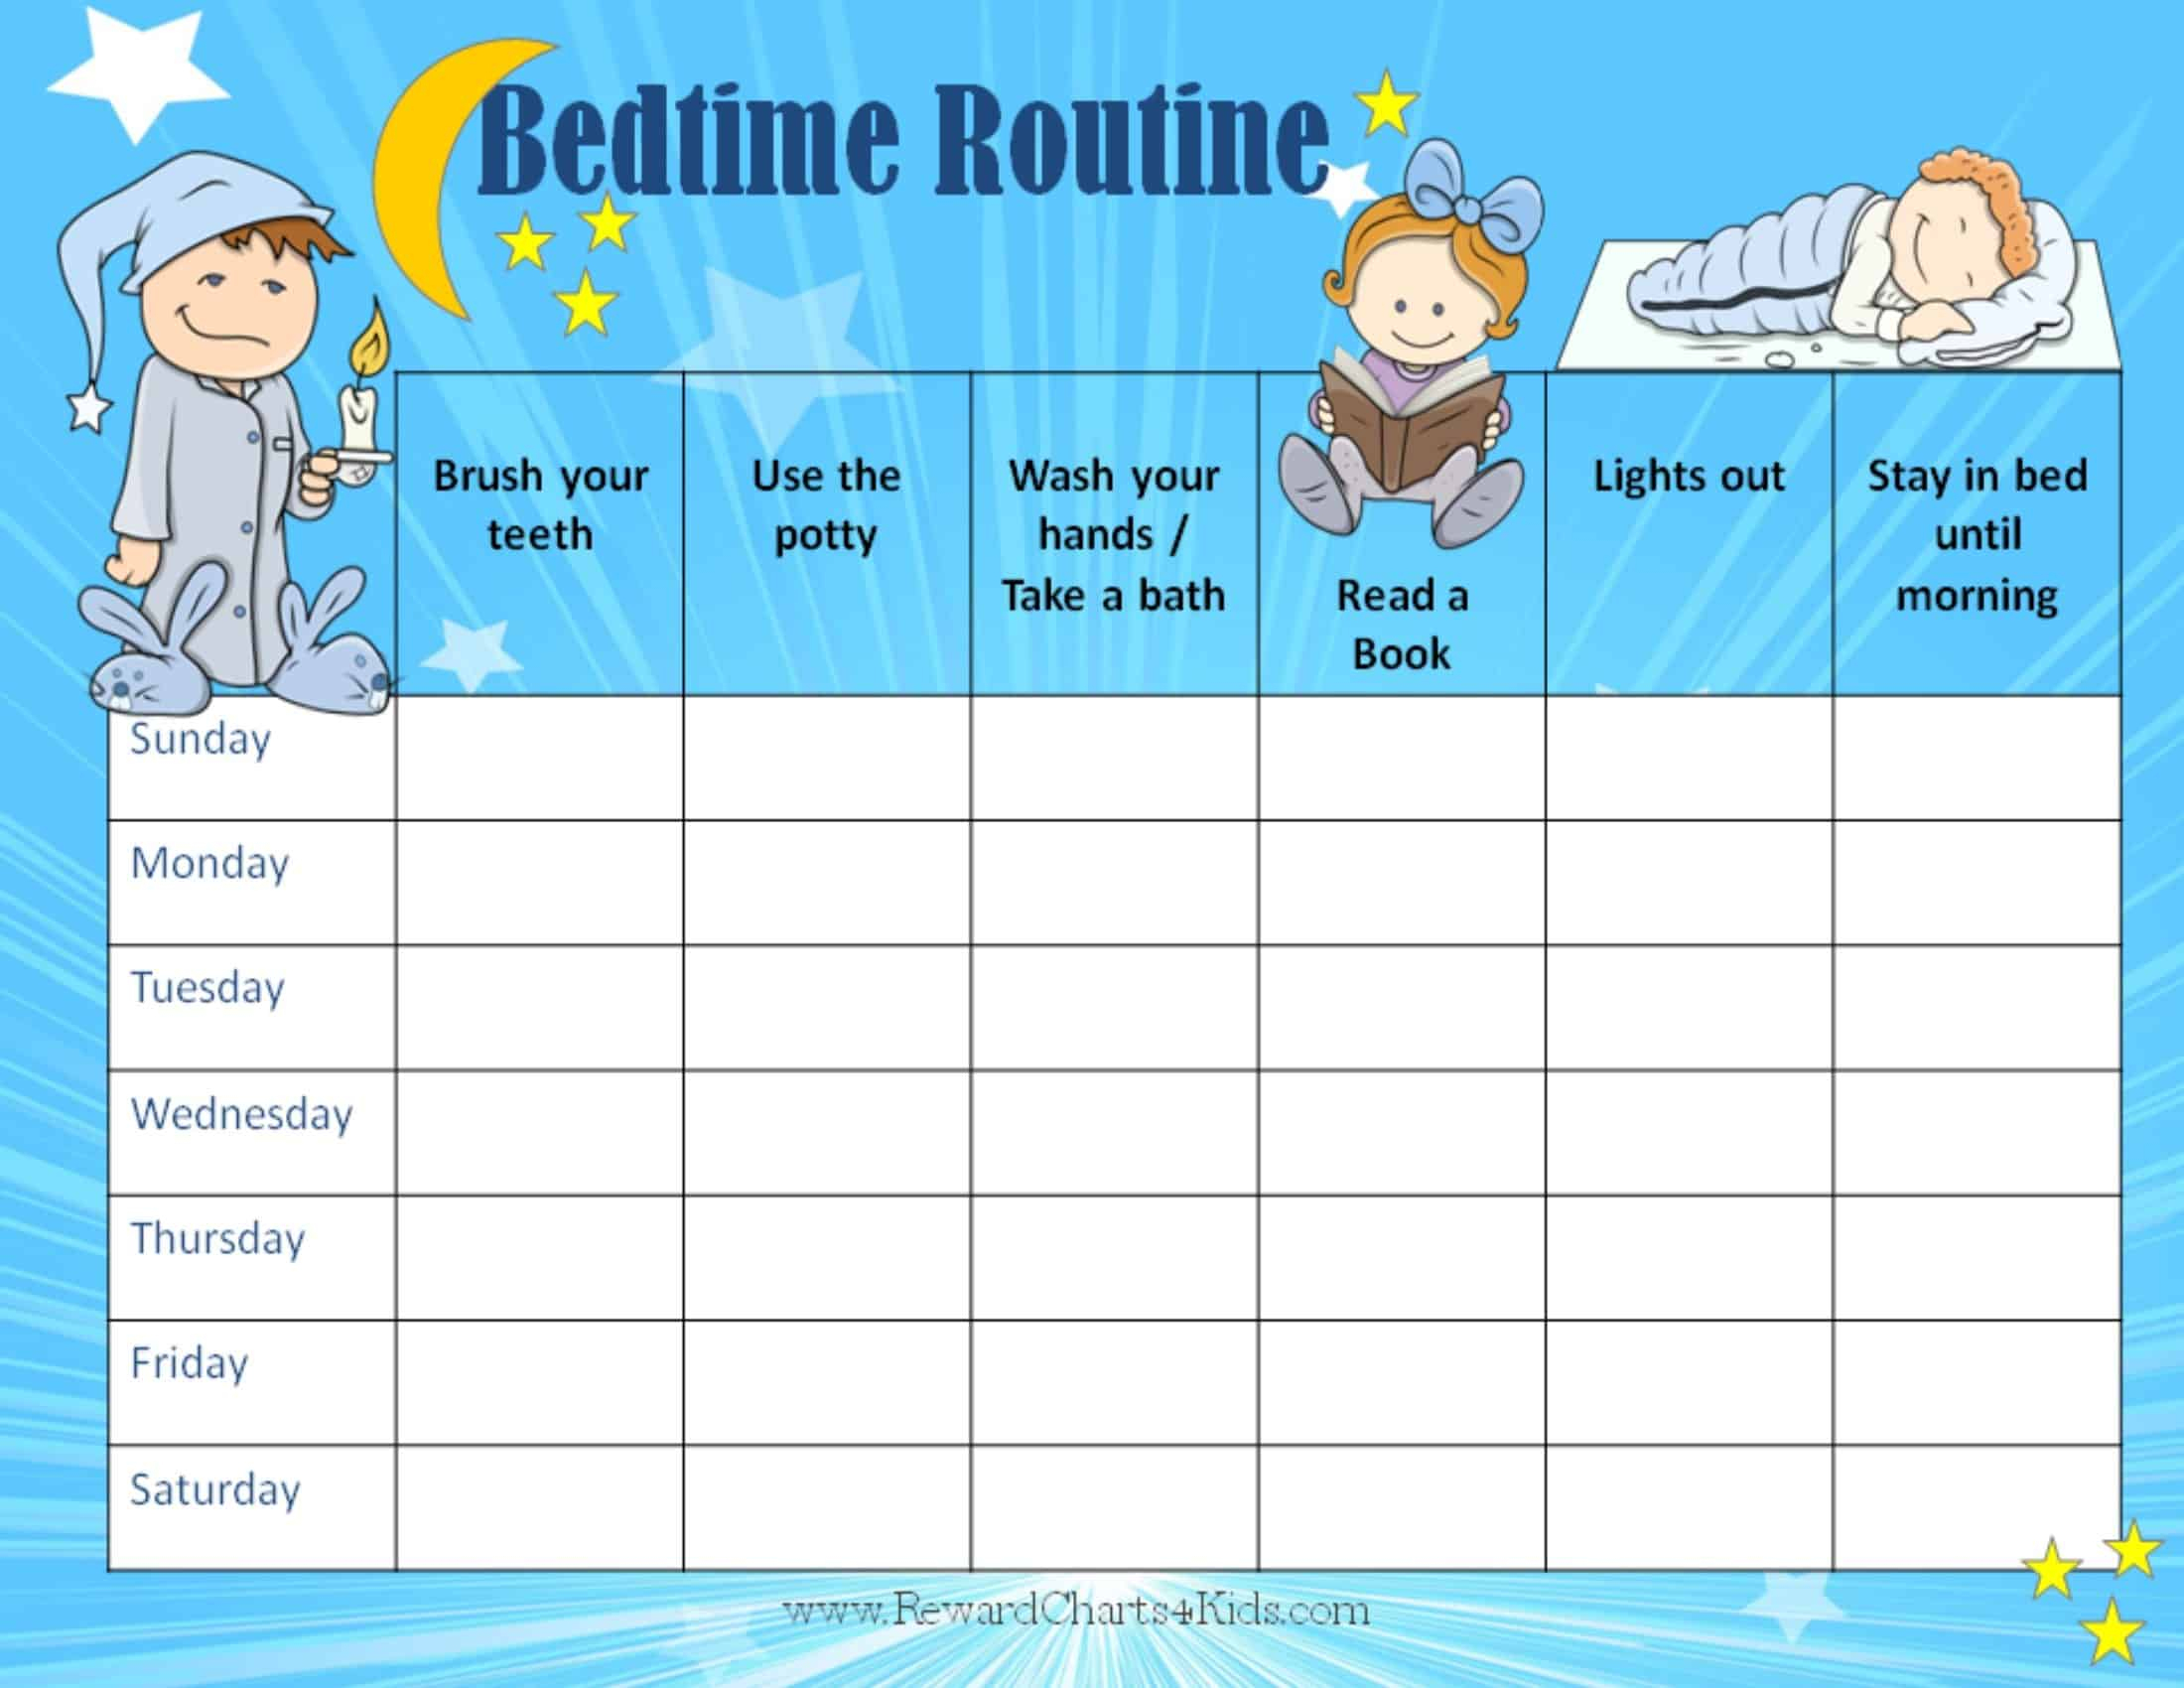 Free Printable Bedtime Routine Chart | Customize Online Then Print - Free Printable Bedtime Routine Chart